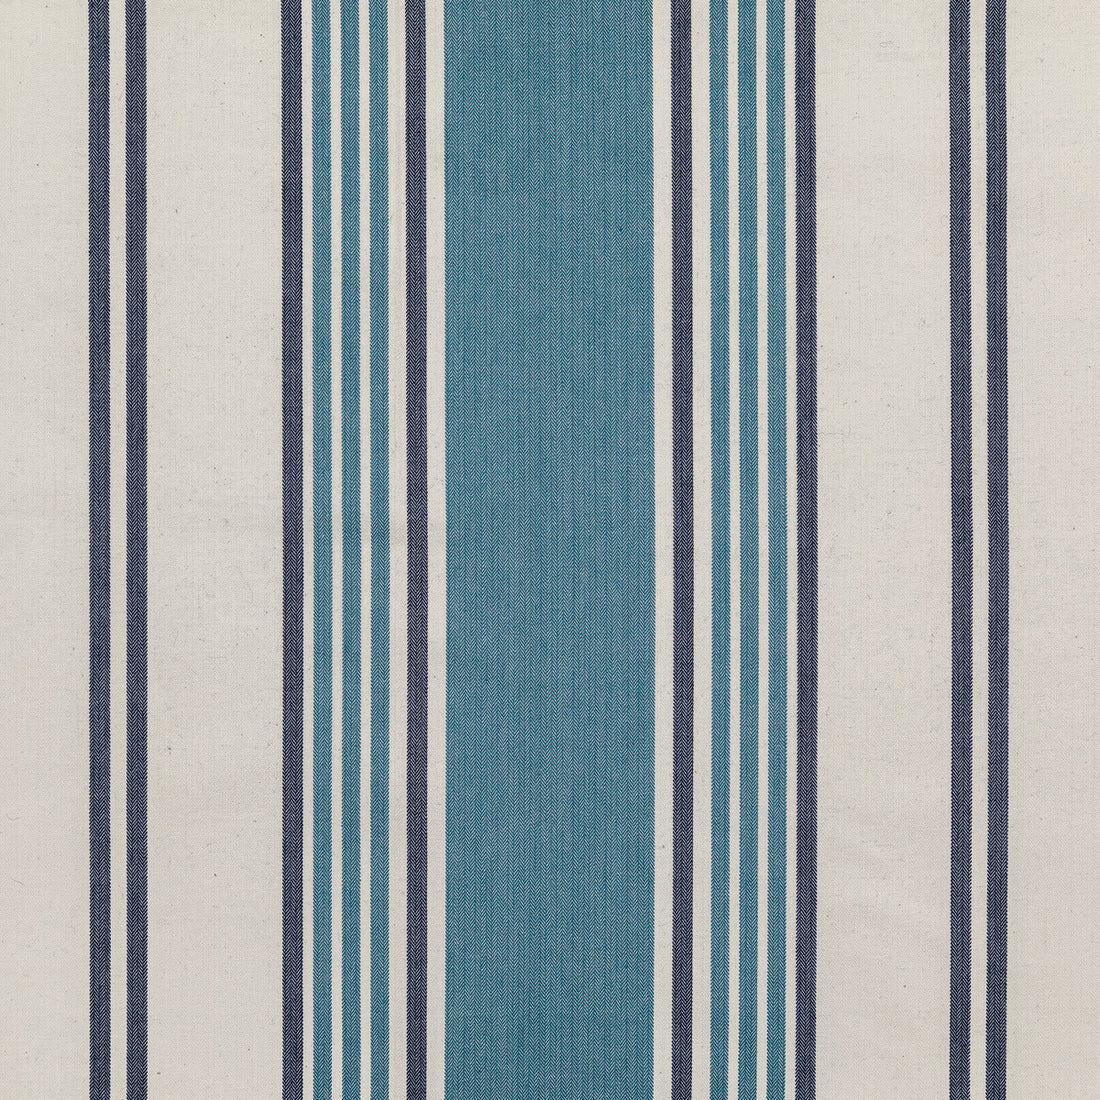 Derby Stripe fabric in blue/navy color - pattern BFC-3686.513.0 - by Lee Jofa in the Blithfield collection